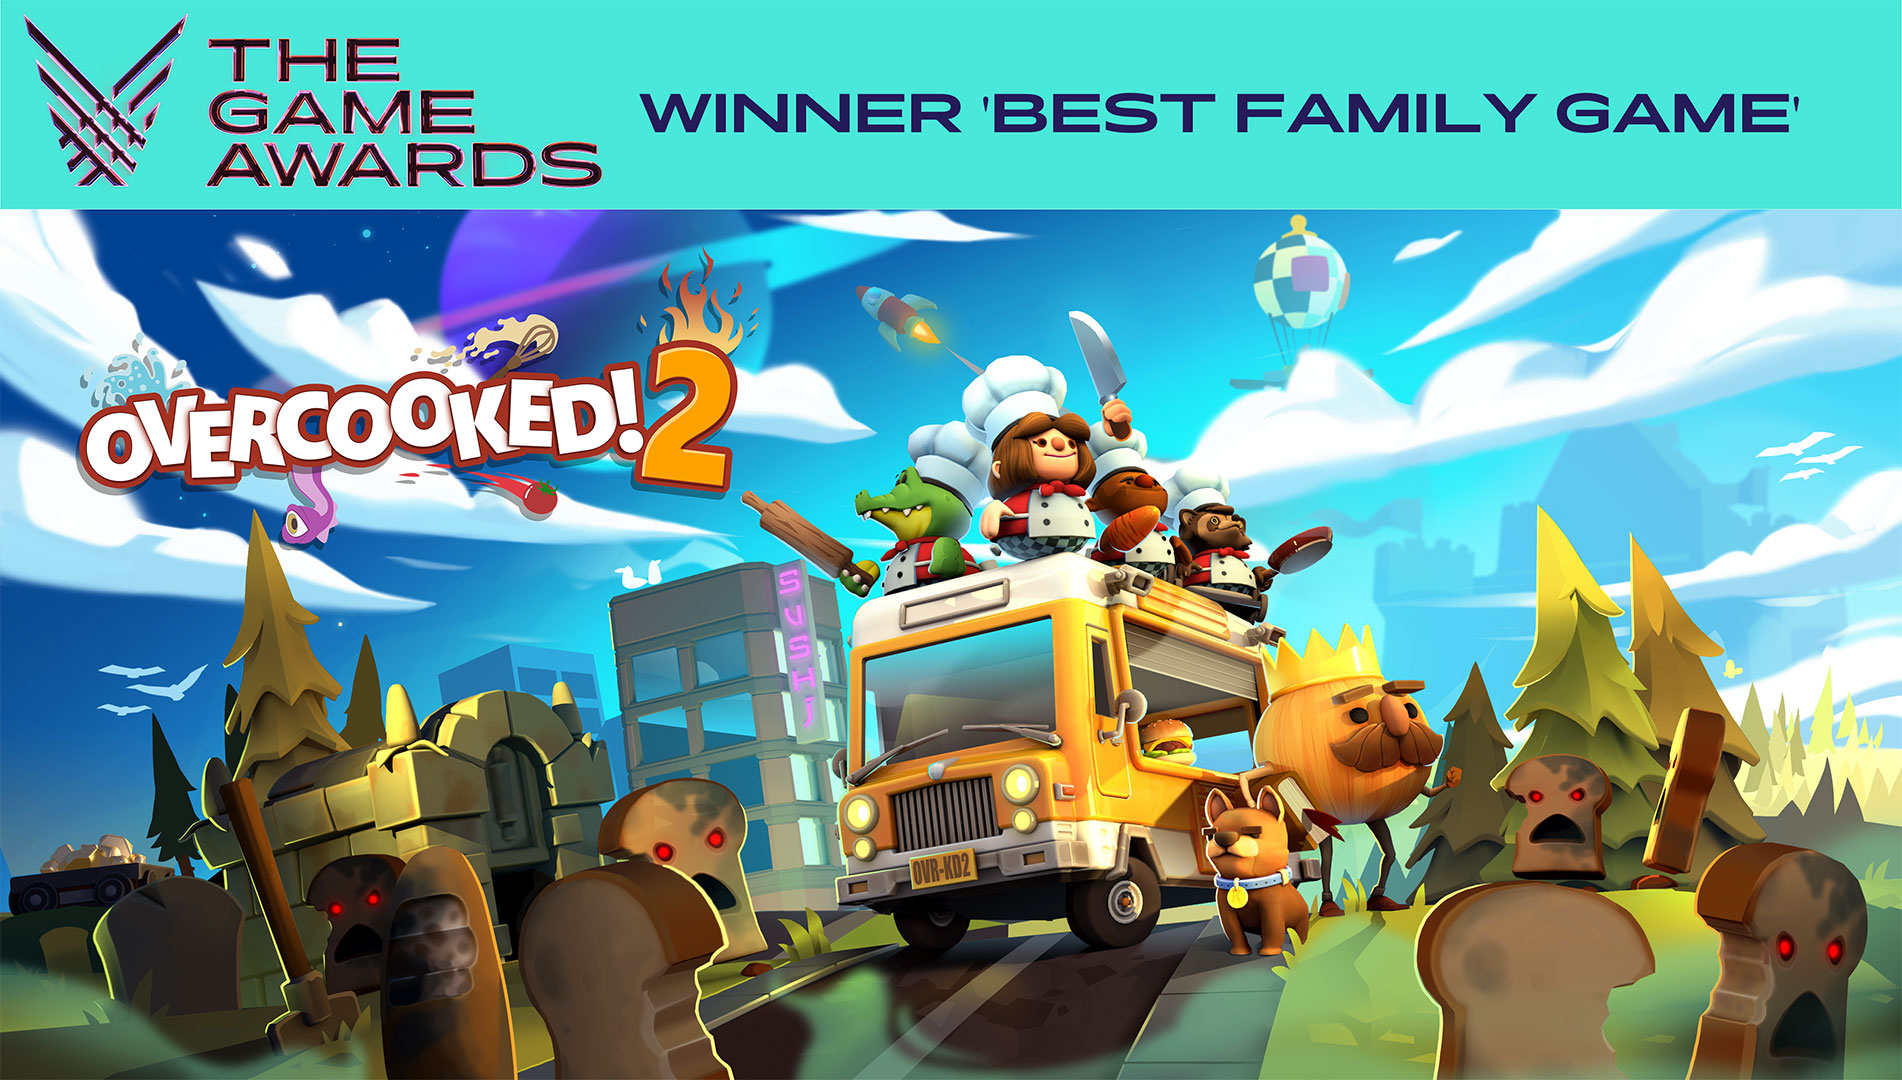 Overcooked! 2 Wins ‘Best Family Game’ at The Game Awards Team17